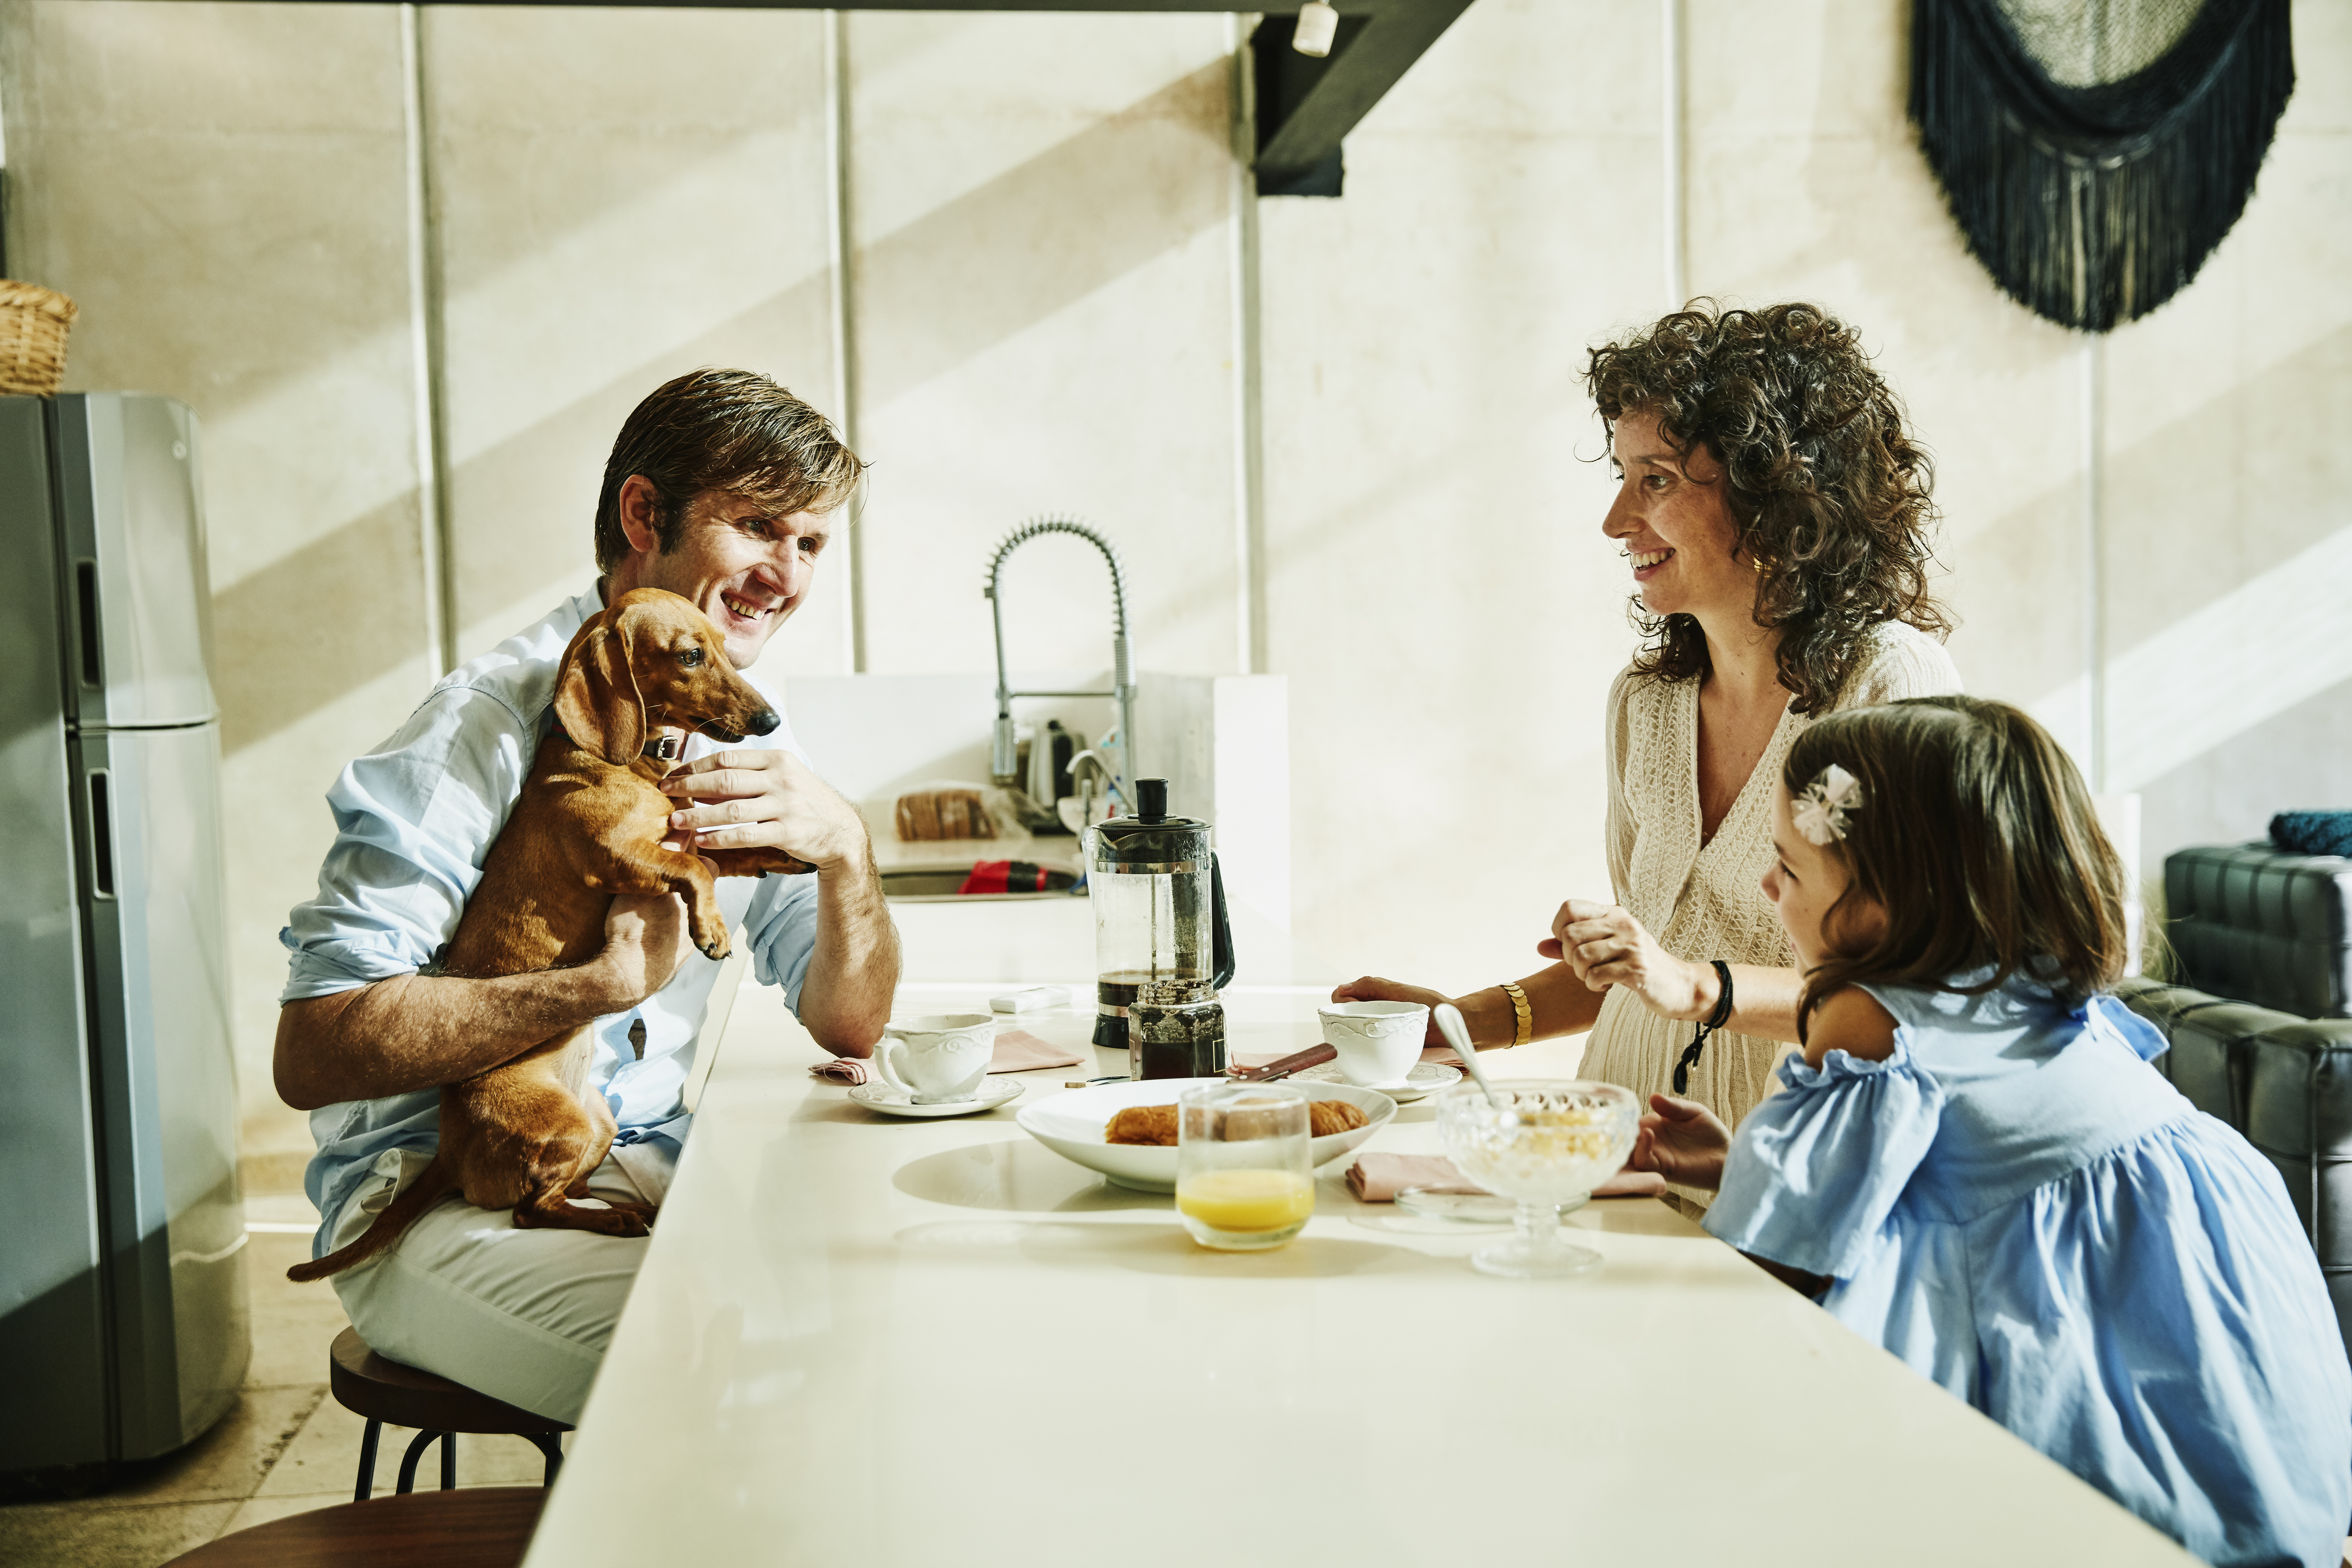 Smiling father holding dog while having breakfast with family in kitchen | Source: Getty Images